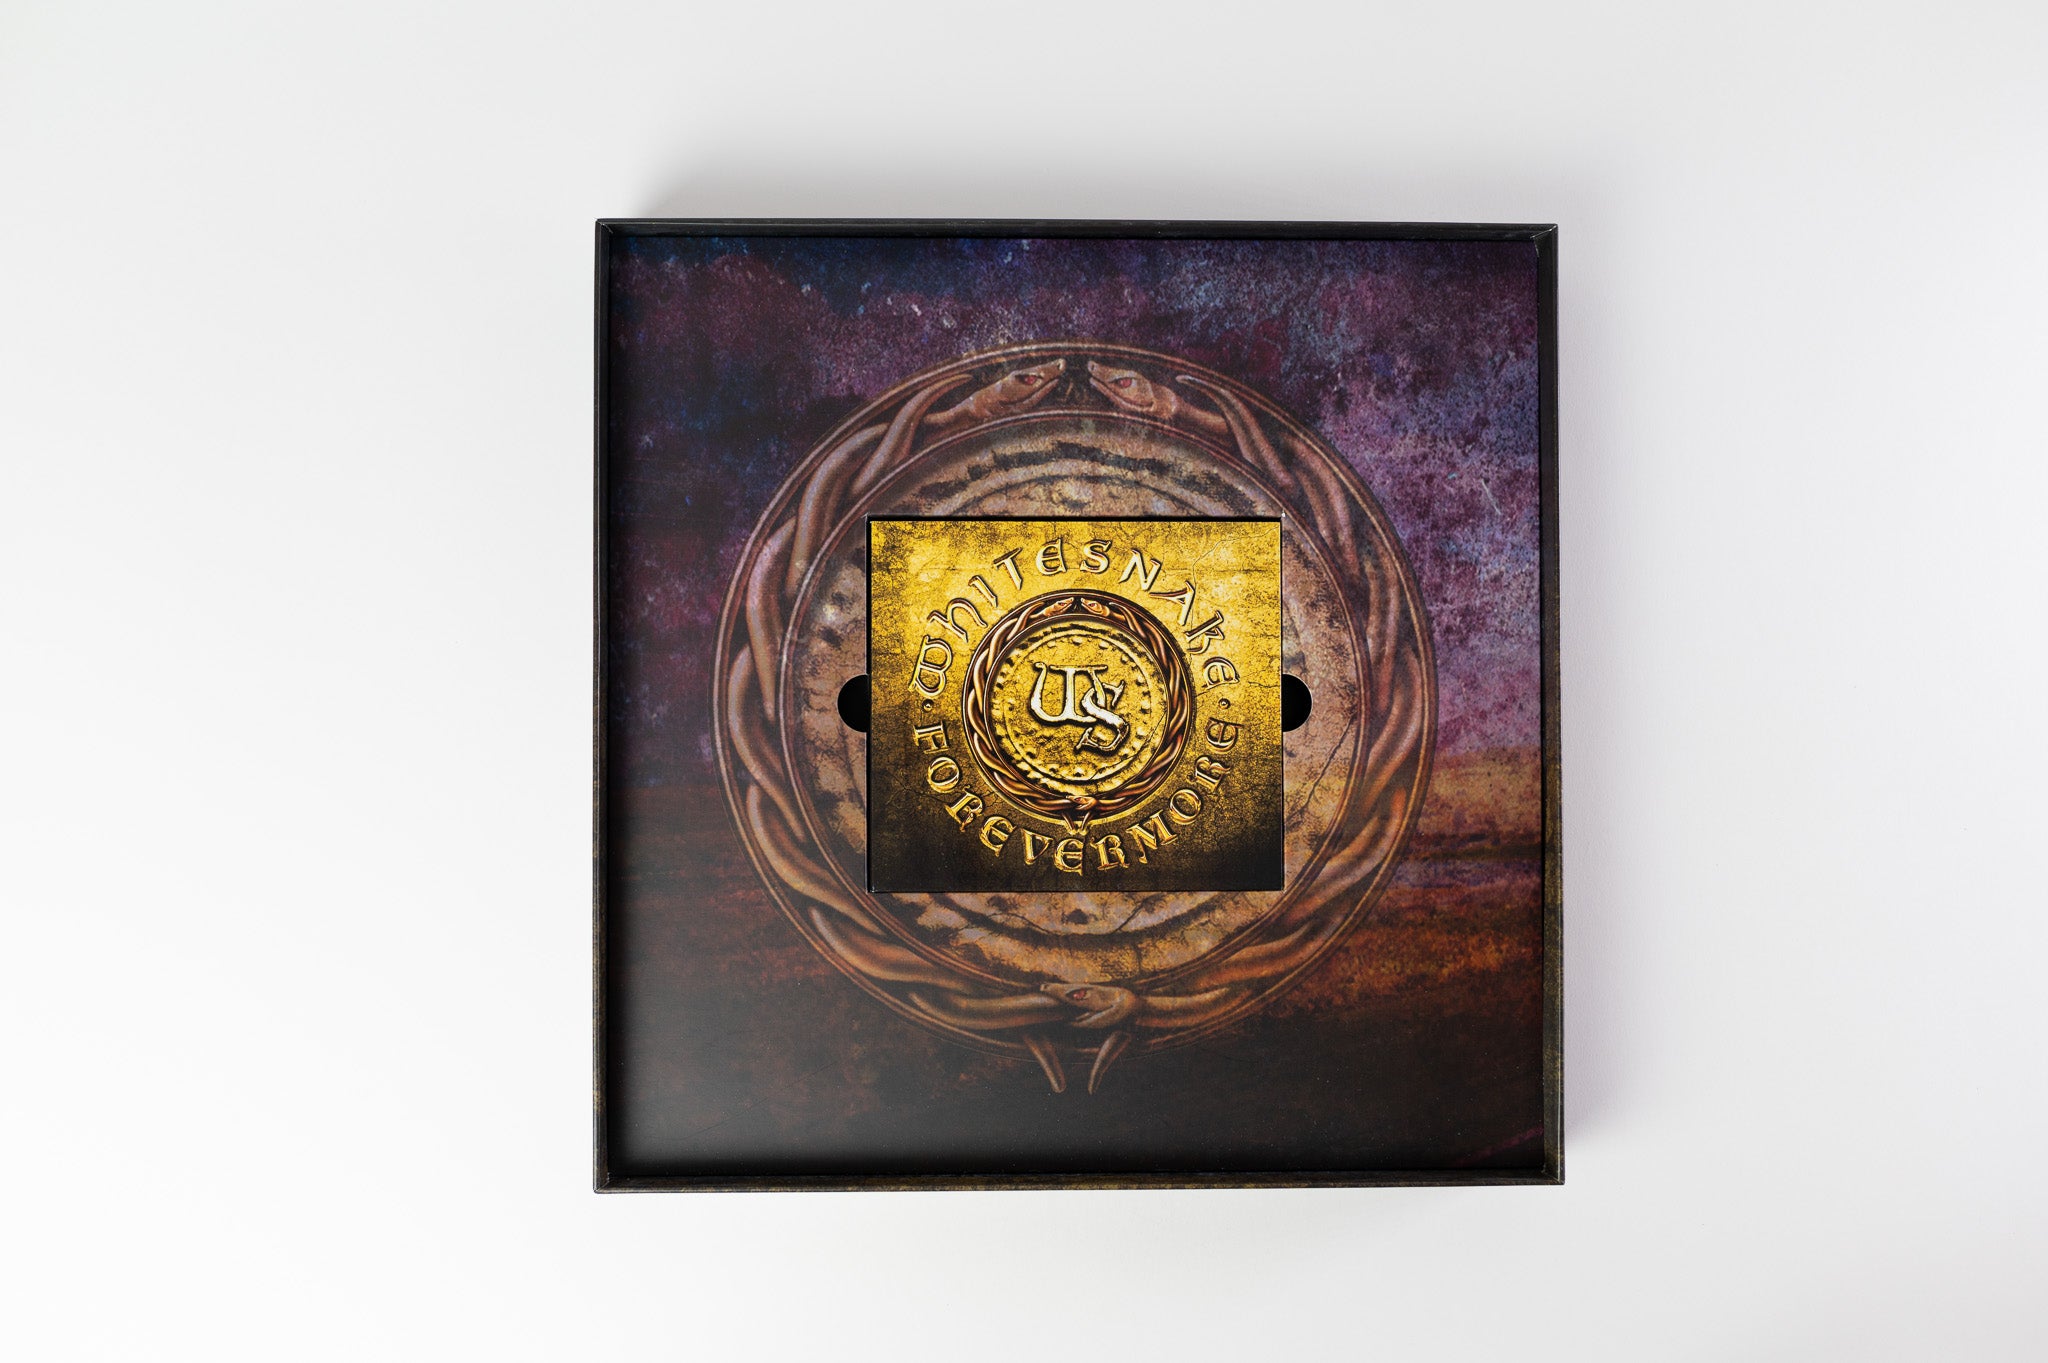 Whitesnake - Forevermore on Frontier Records Deluxe Edition Box Set